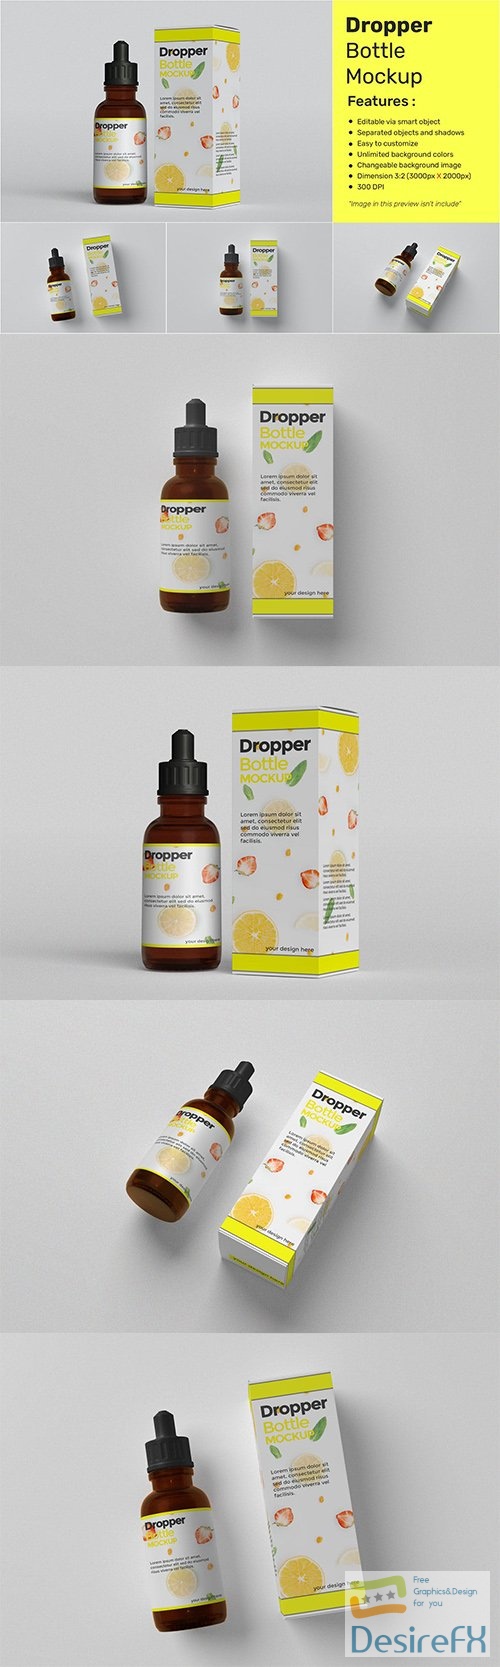 Drop Bottle Mockup with Box Package FHQM7U2 PSD